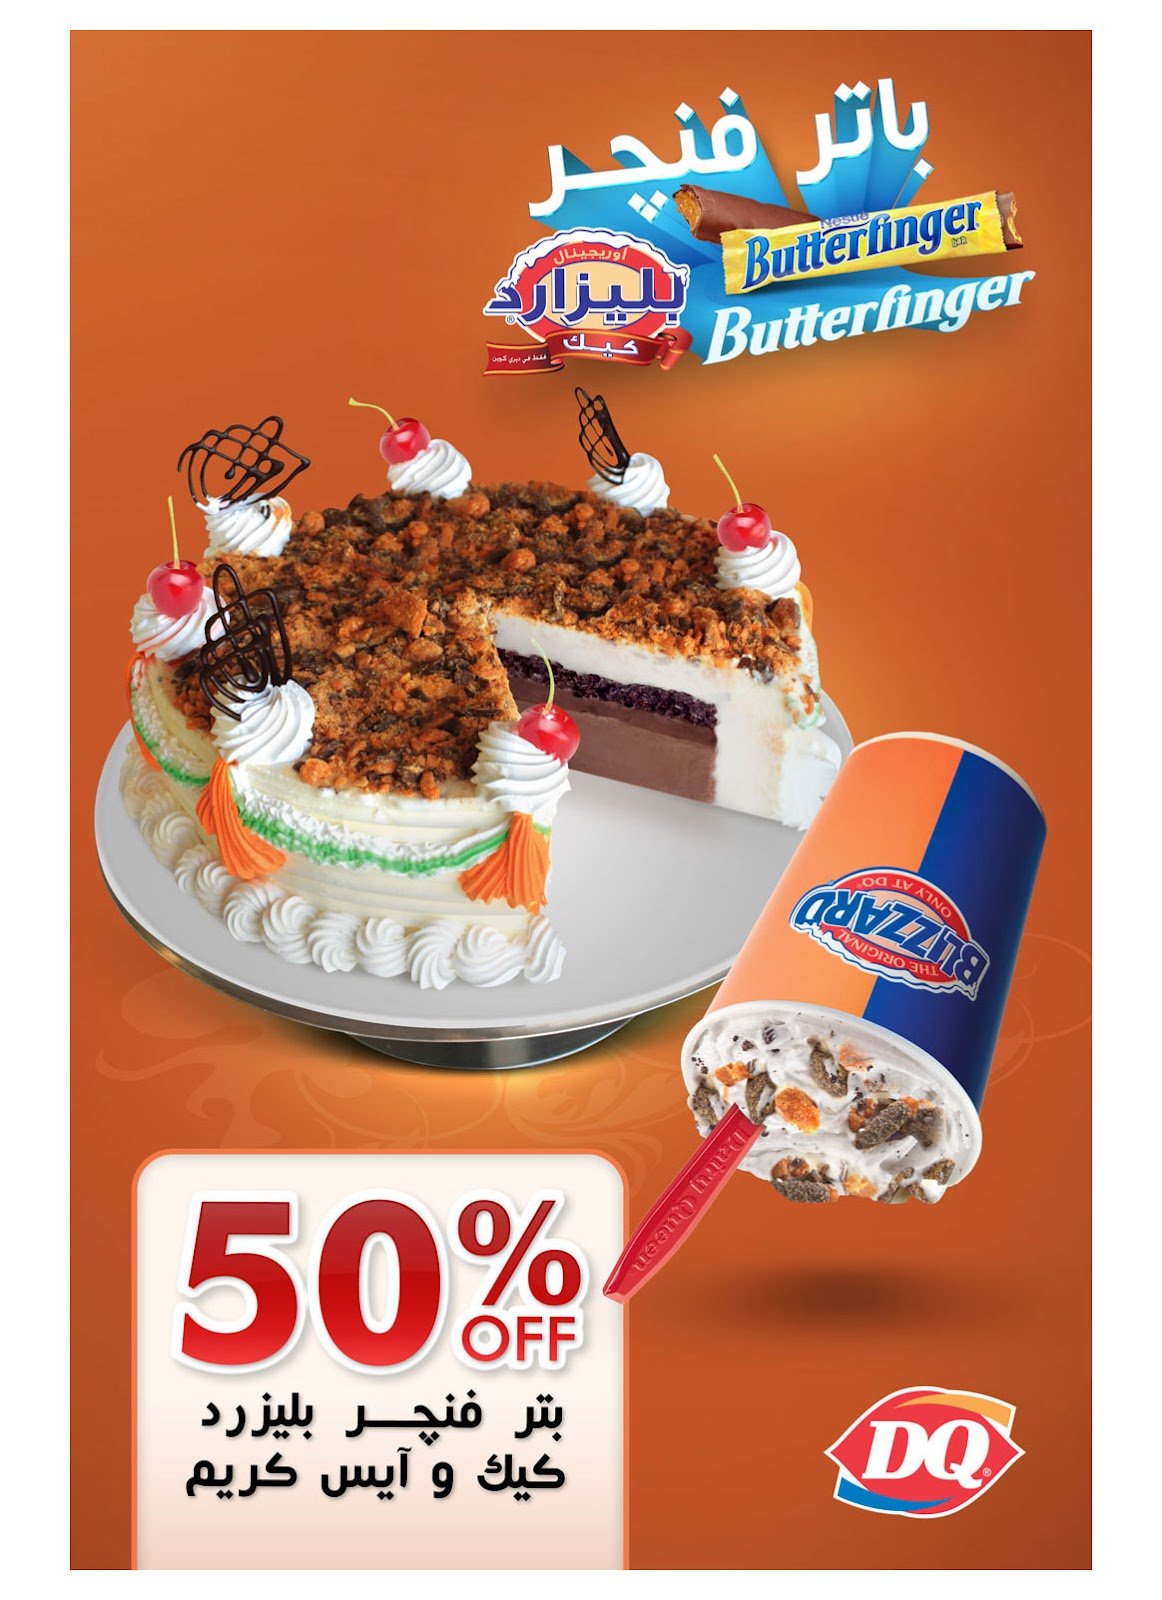 Dairy Queen Saudi Arabia: Good news to all DQ Lovers, the Butterfinger ...